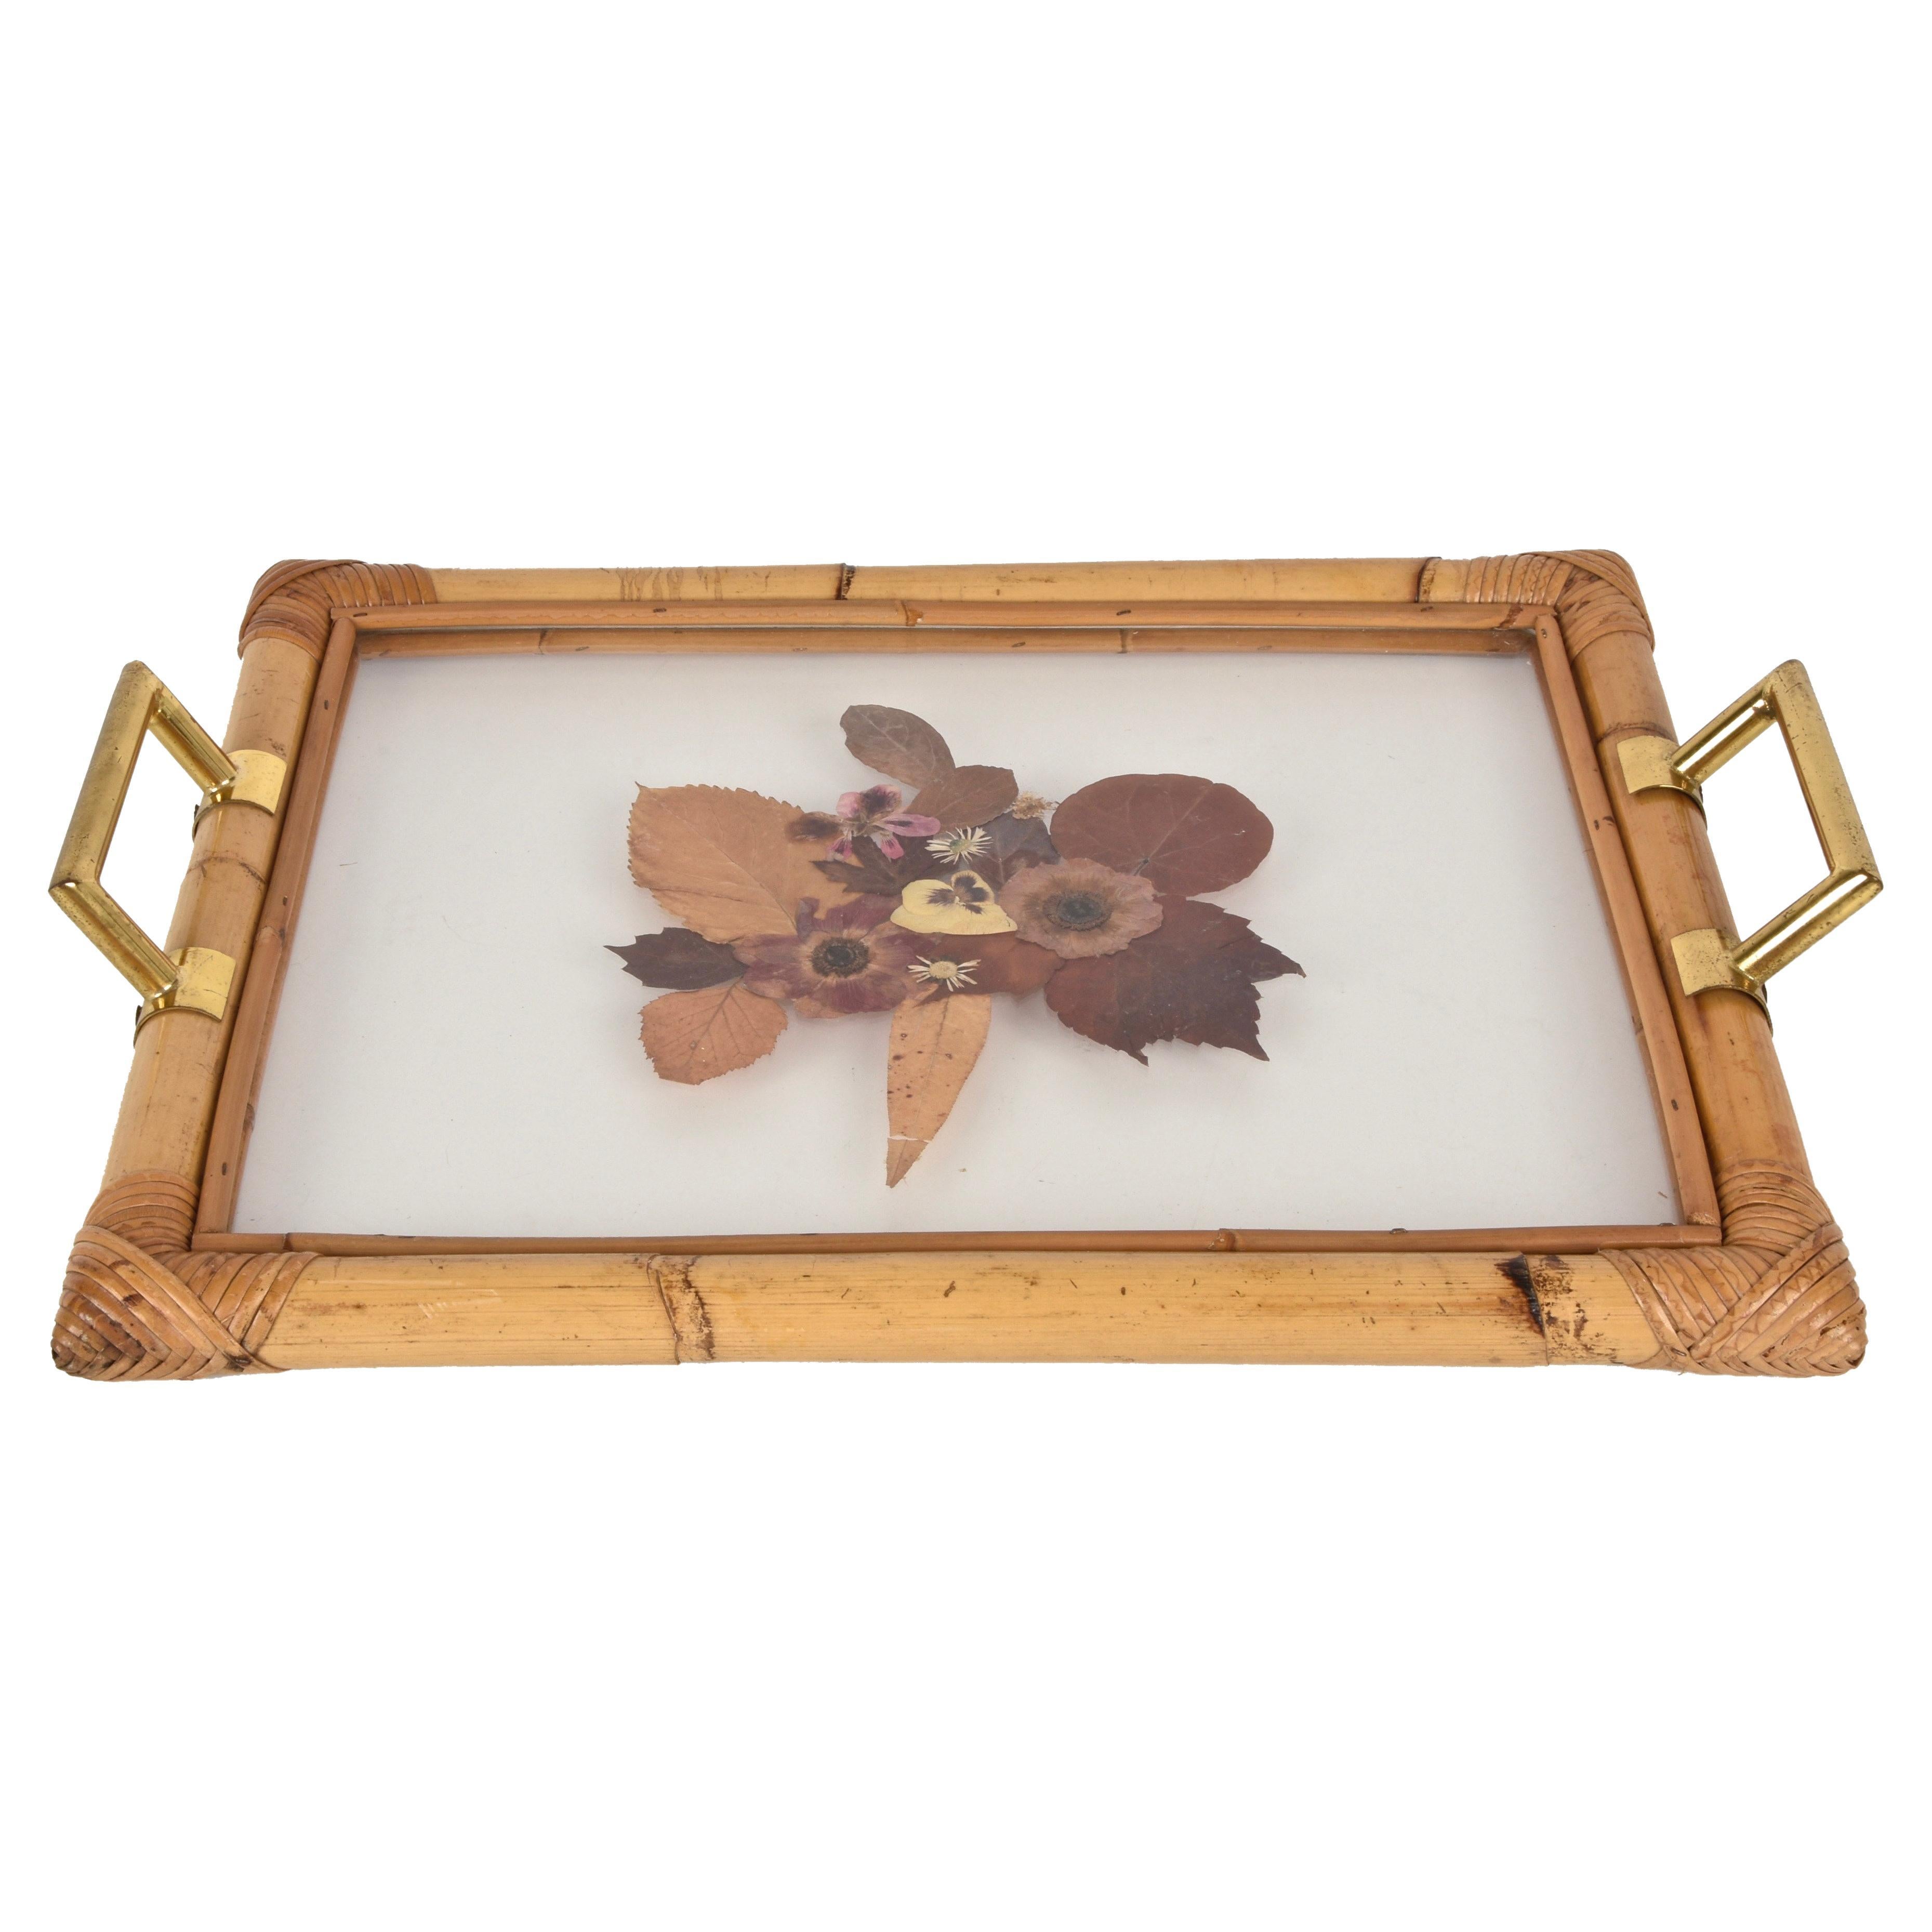 Bamboo Serving Tray with Brass Handles and Beautiful Dried Flowers and Lucite